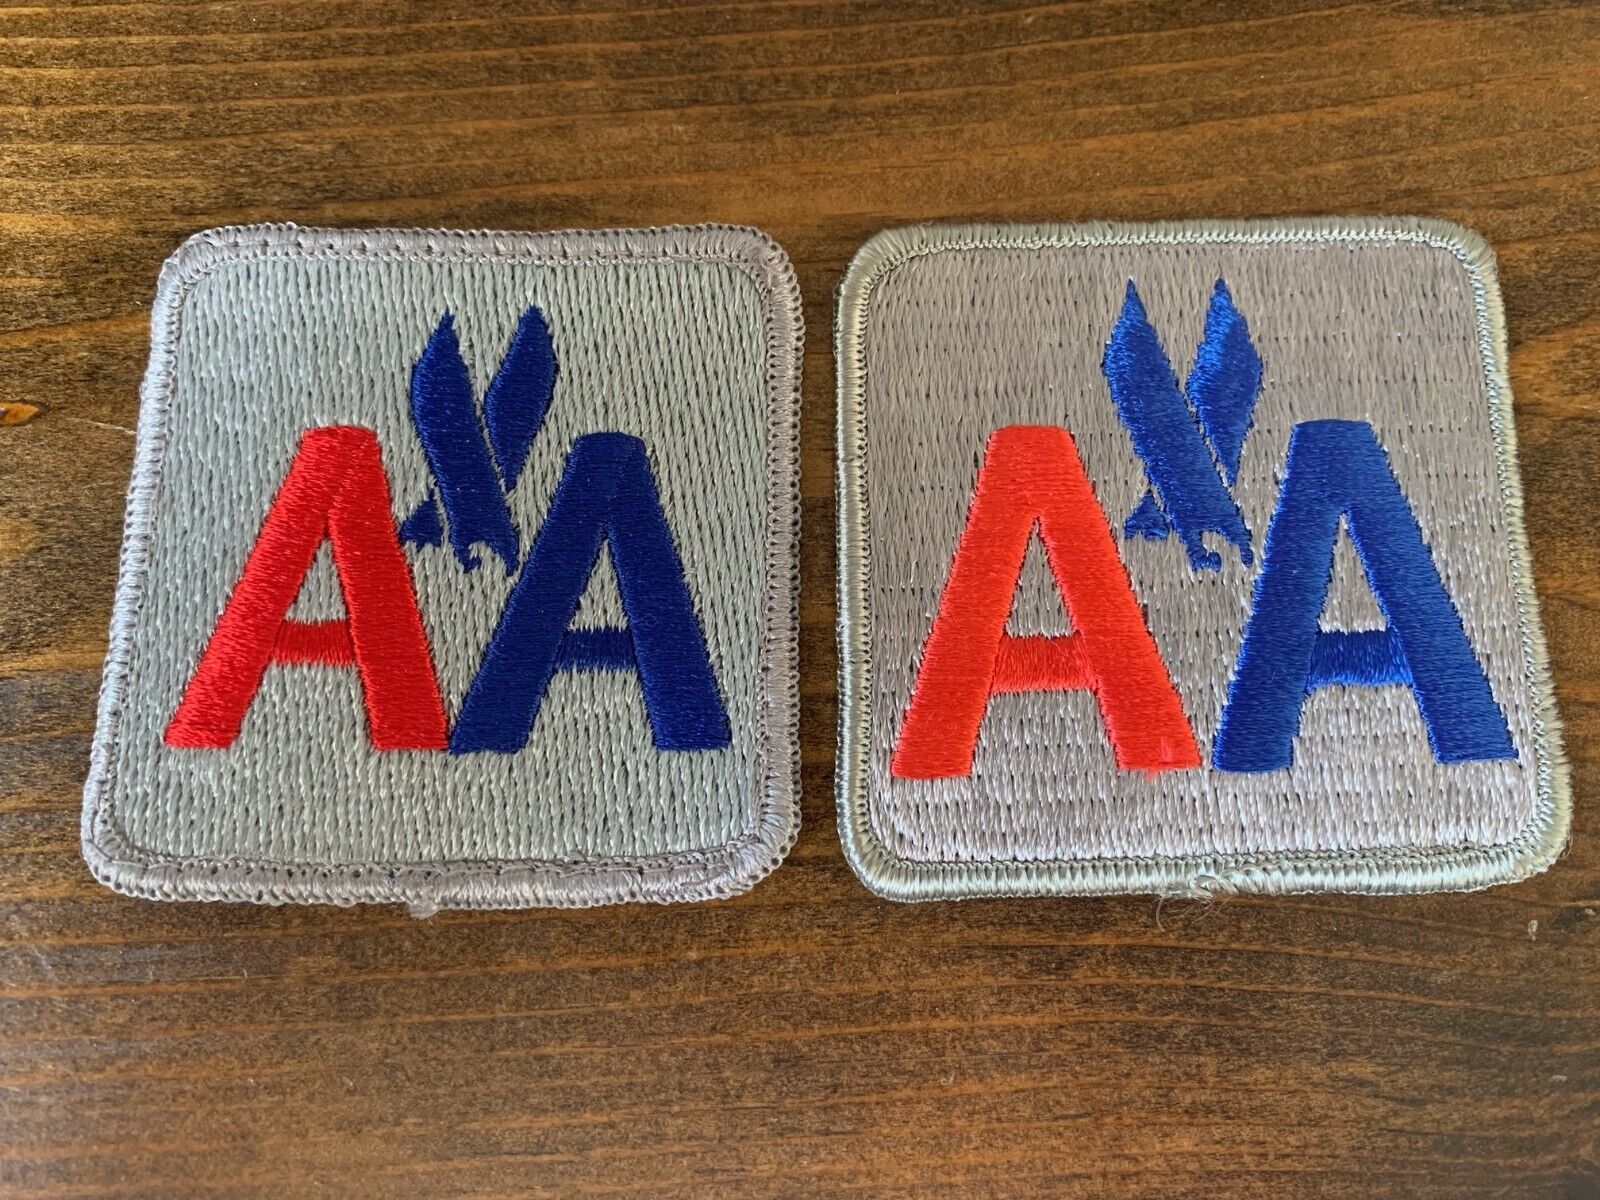 Vintage American Airlines Iron on Patch Unused- Set of 2